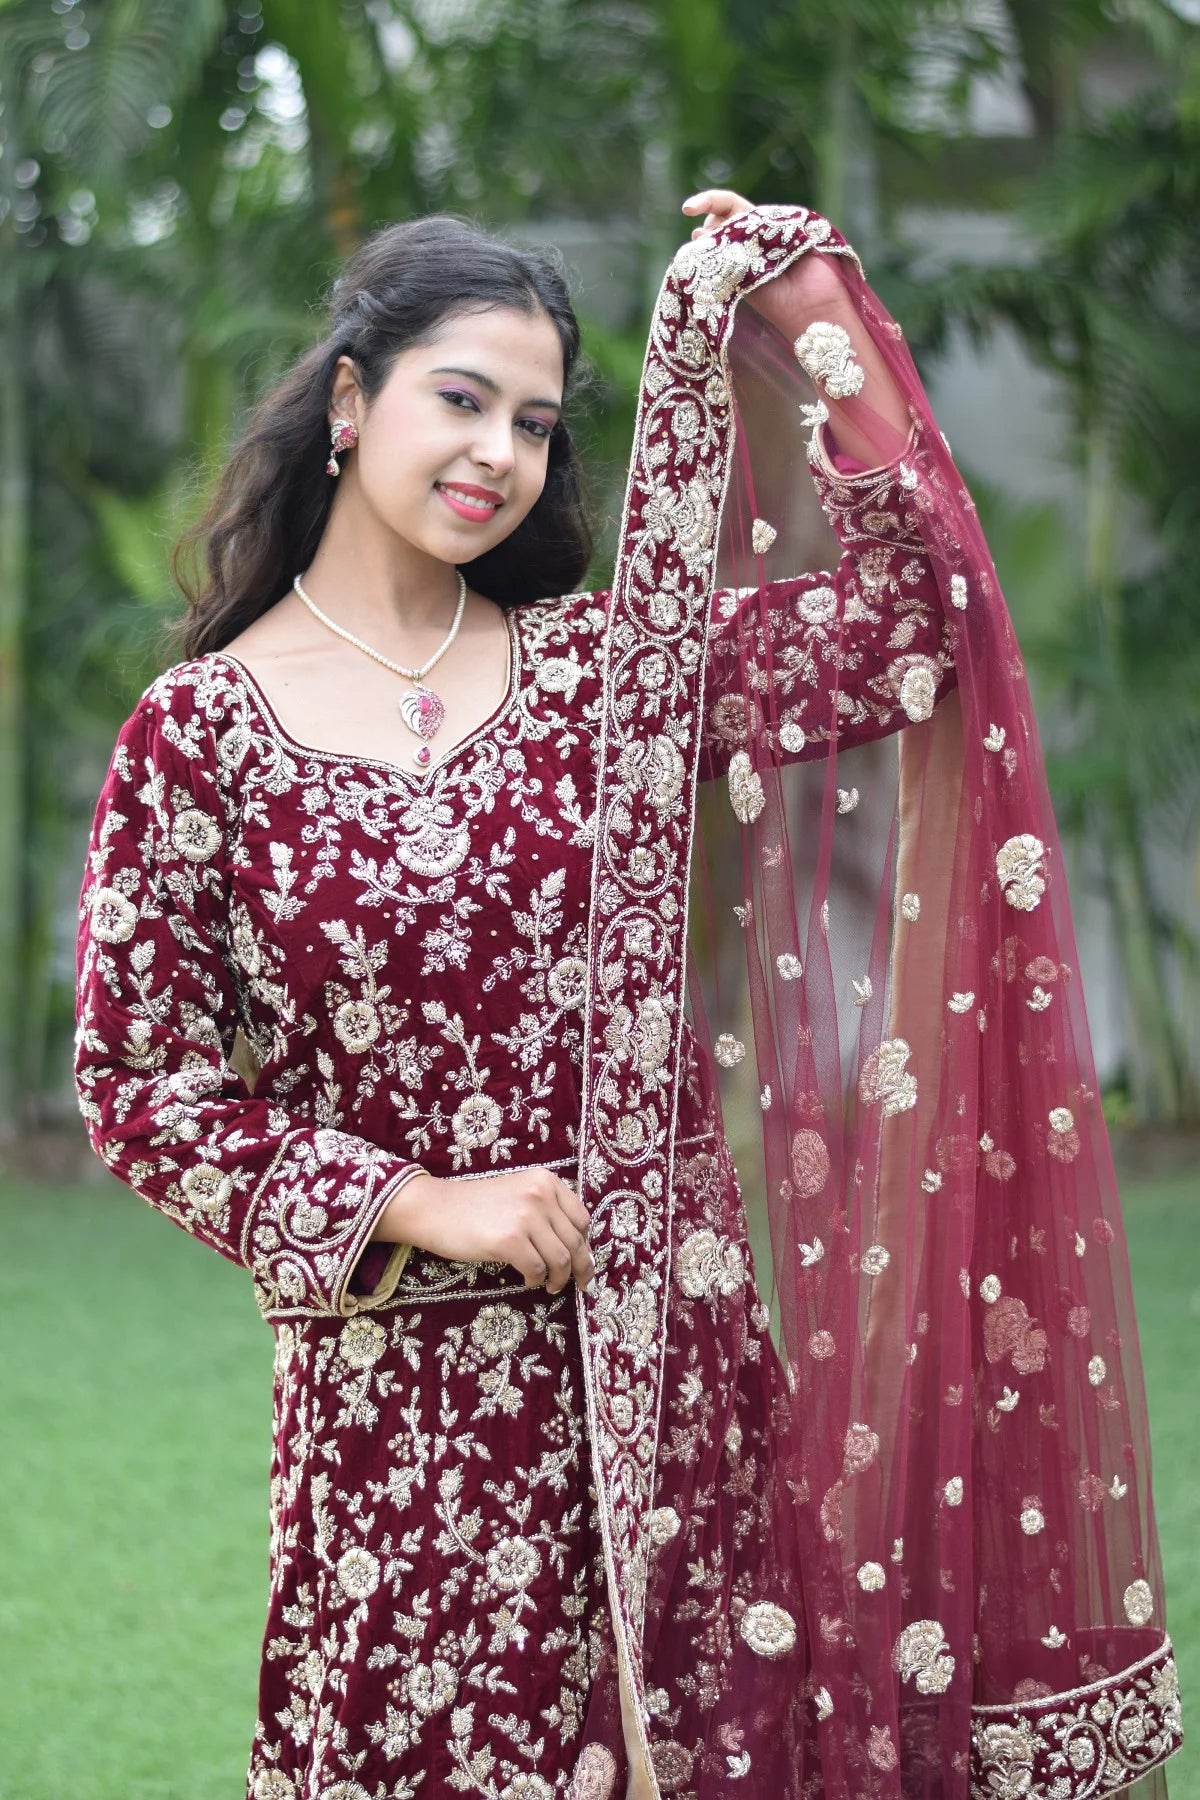 This Indian woman radiates confidence and grace in her maroon Trail Gown, which is sure to turn heads at any event.